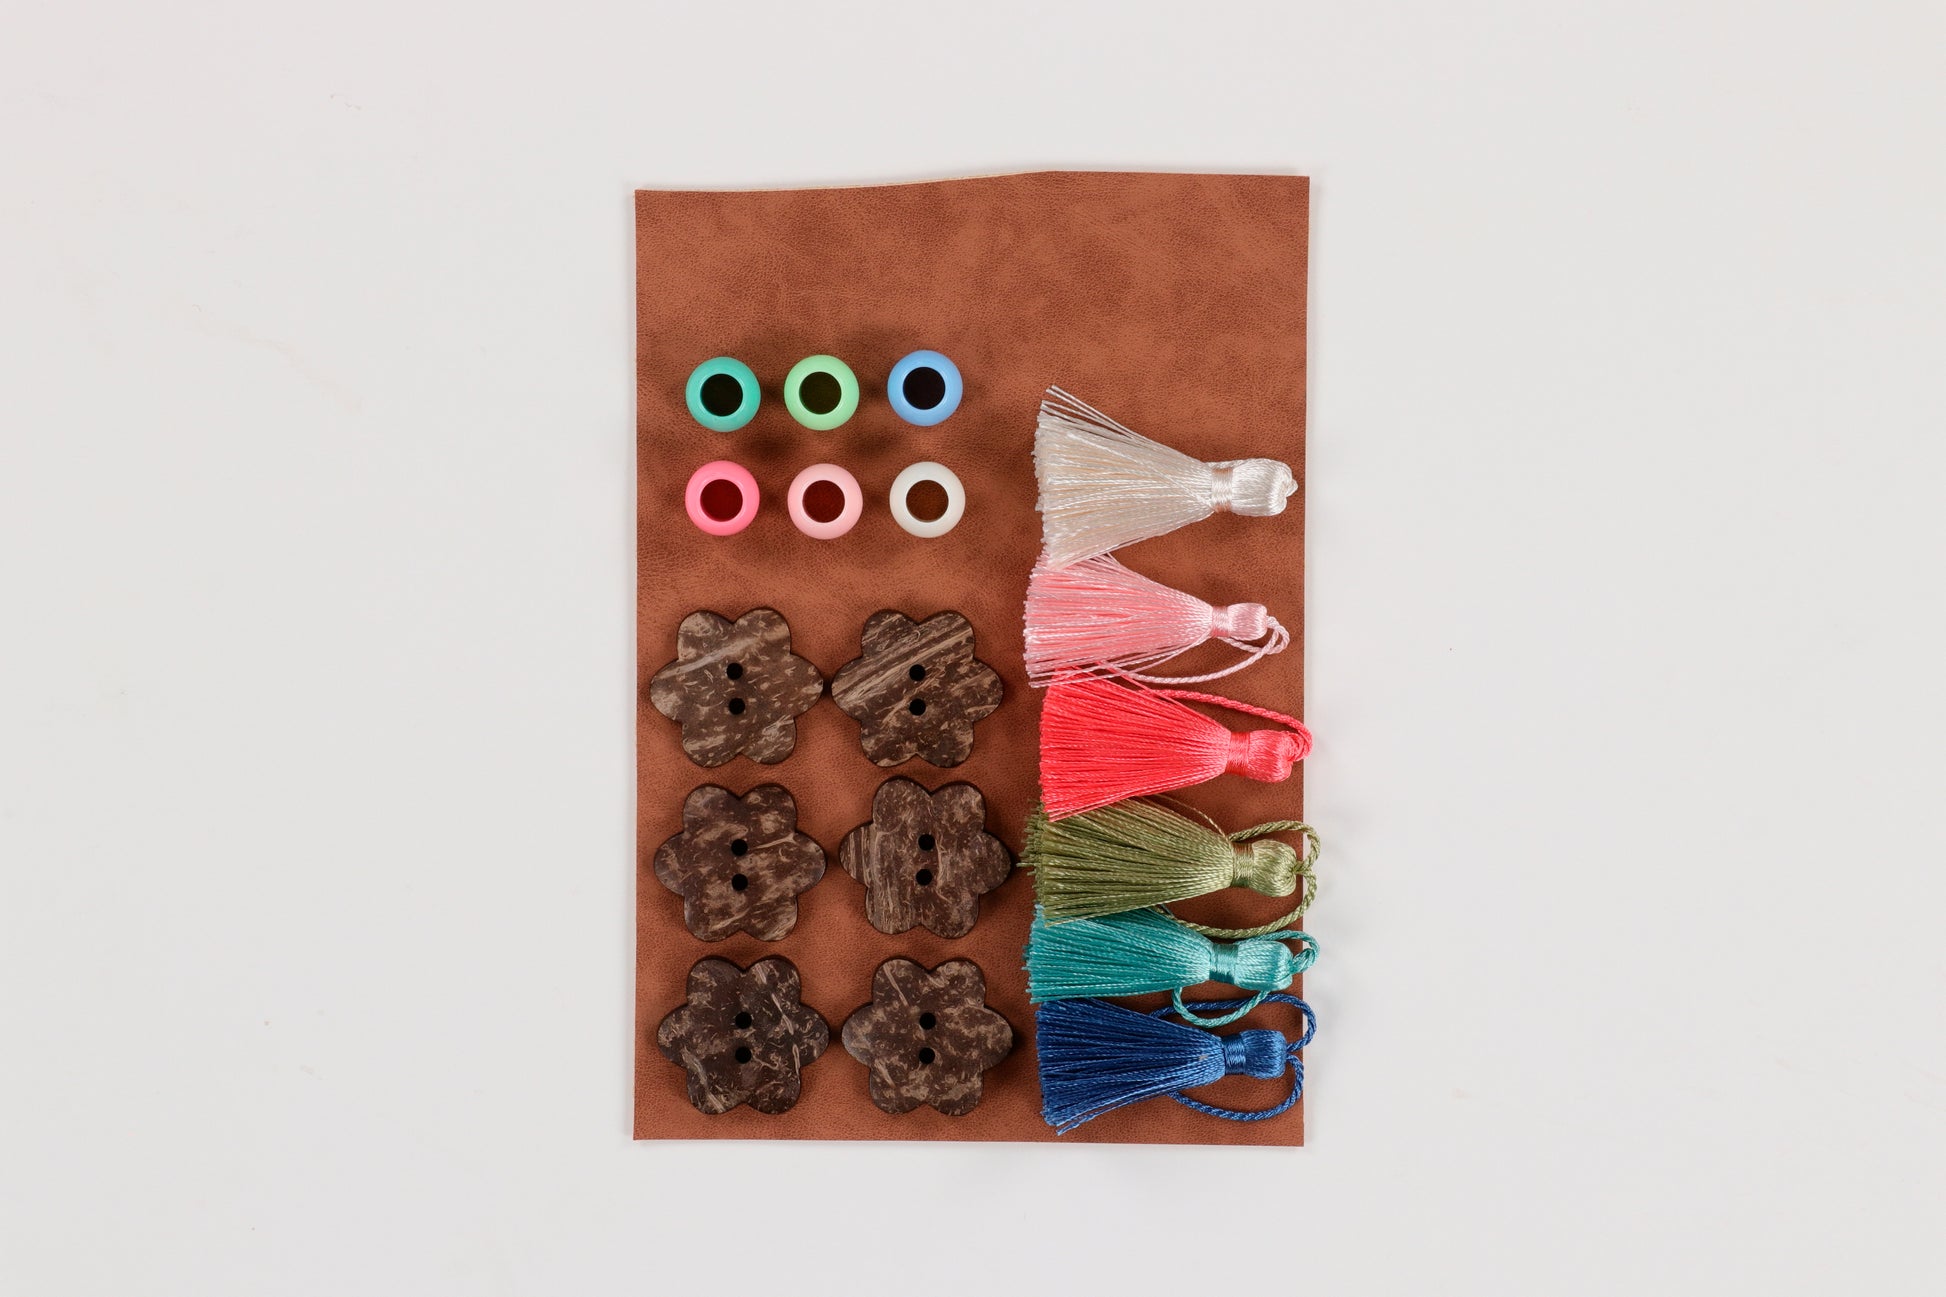 With the Happy Place Embroidery Projects Embellishment Kit (KDKB1292), create stunning gifts and decor with leather, tassels, and beautiful beads! Photo shows the contents of the package.